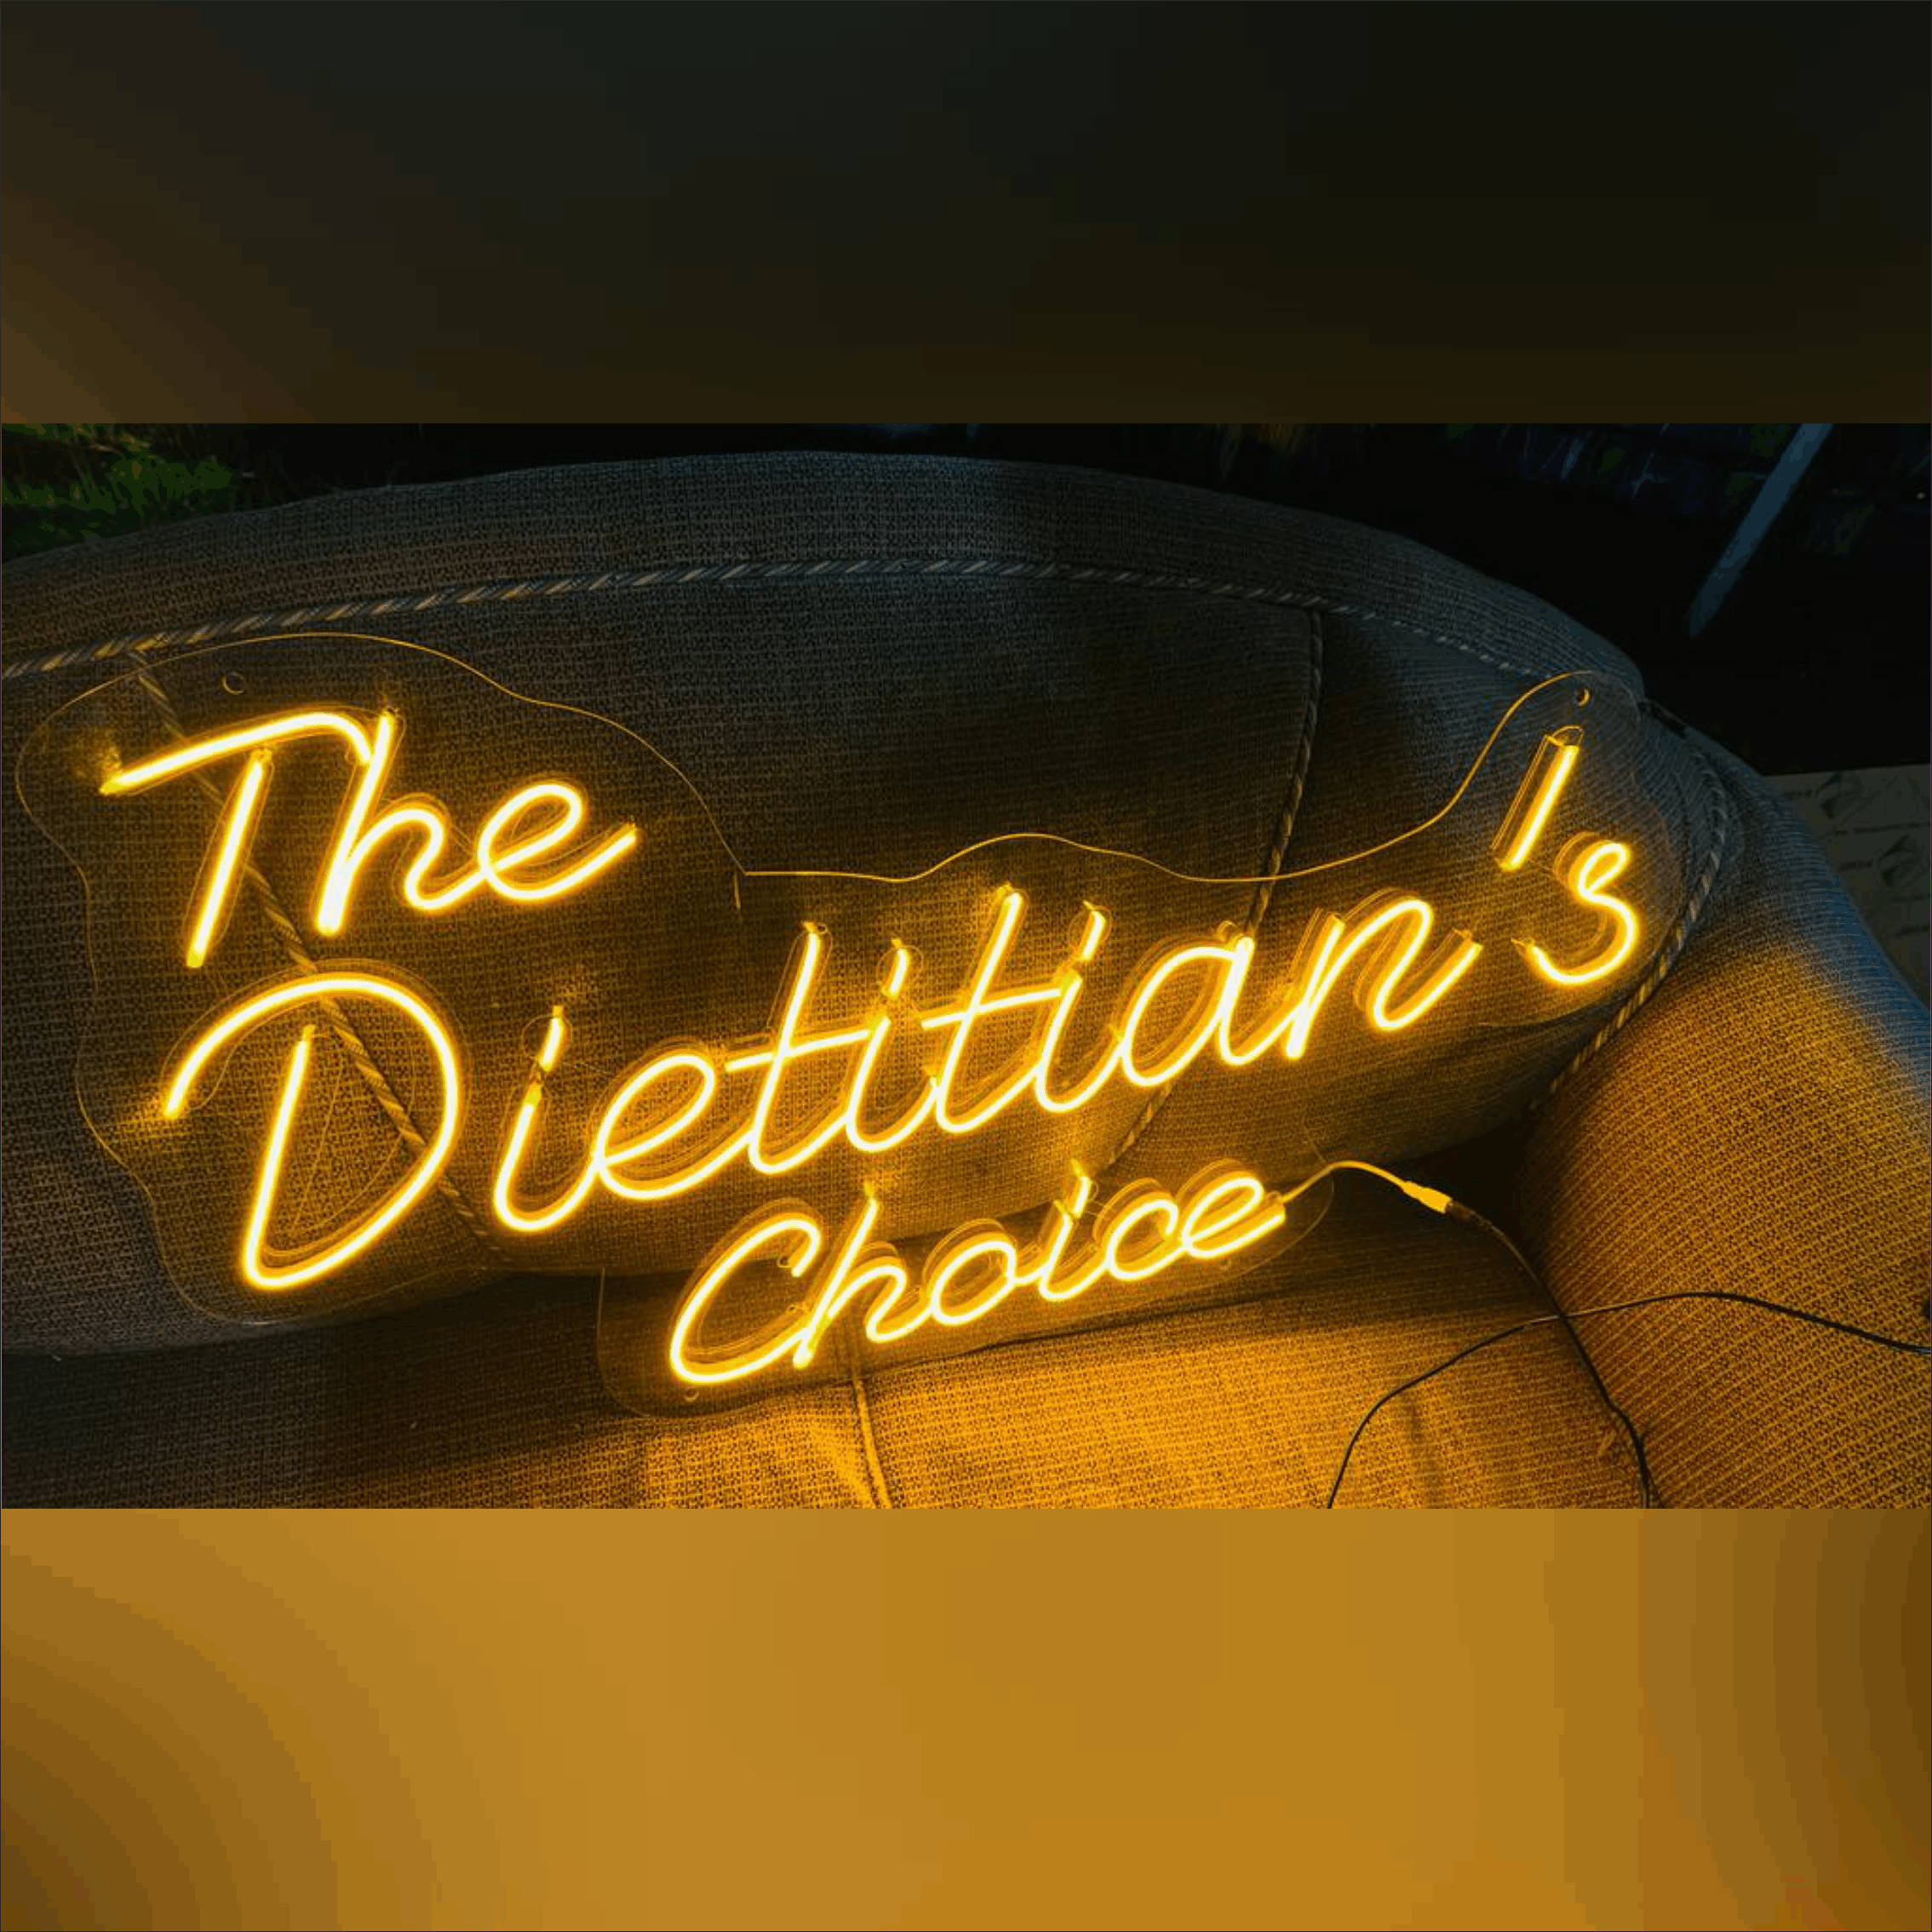 The Dietitian's Choice Neon Sign Font